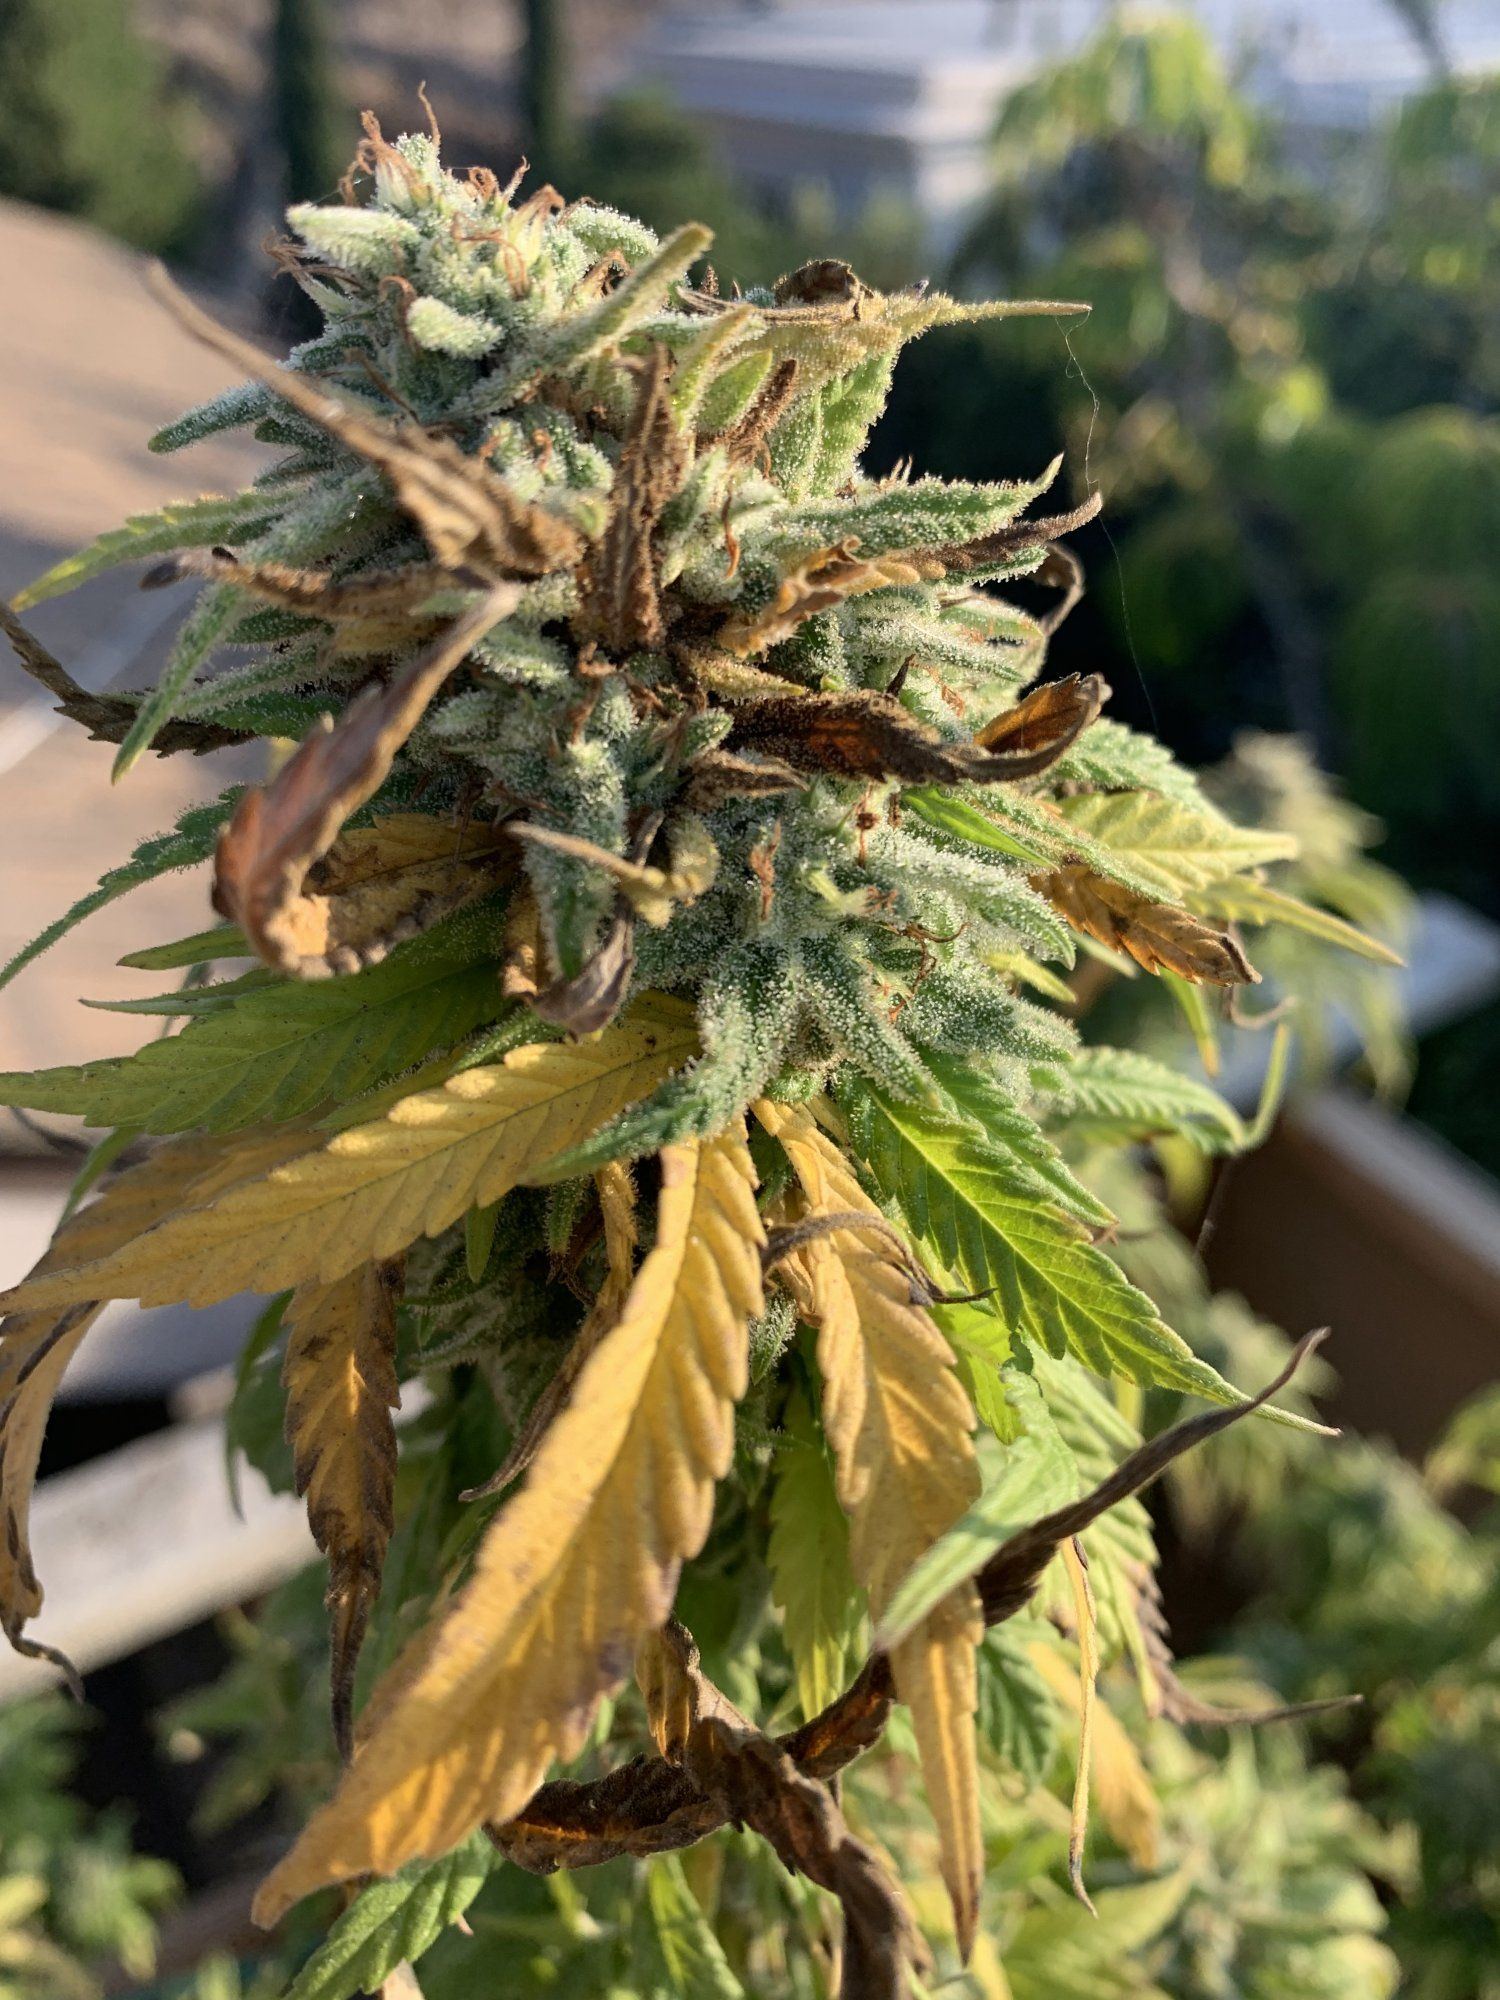 Anyone know if this is bud rot 3